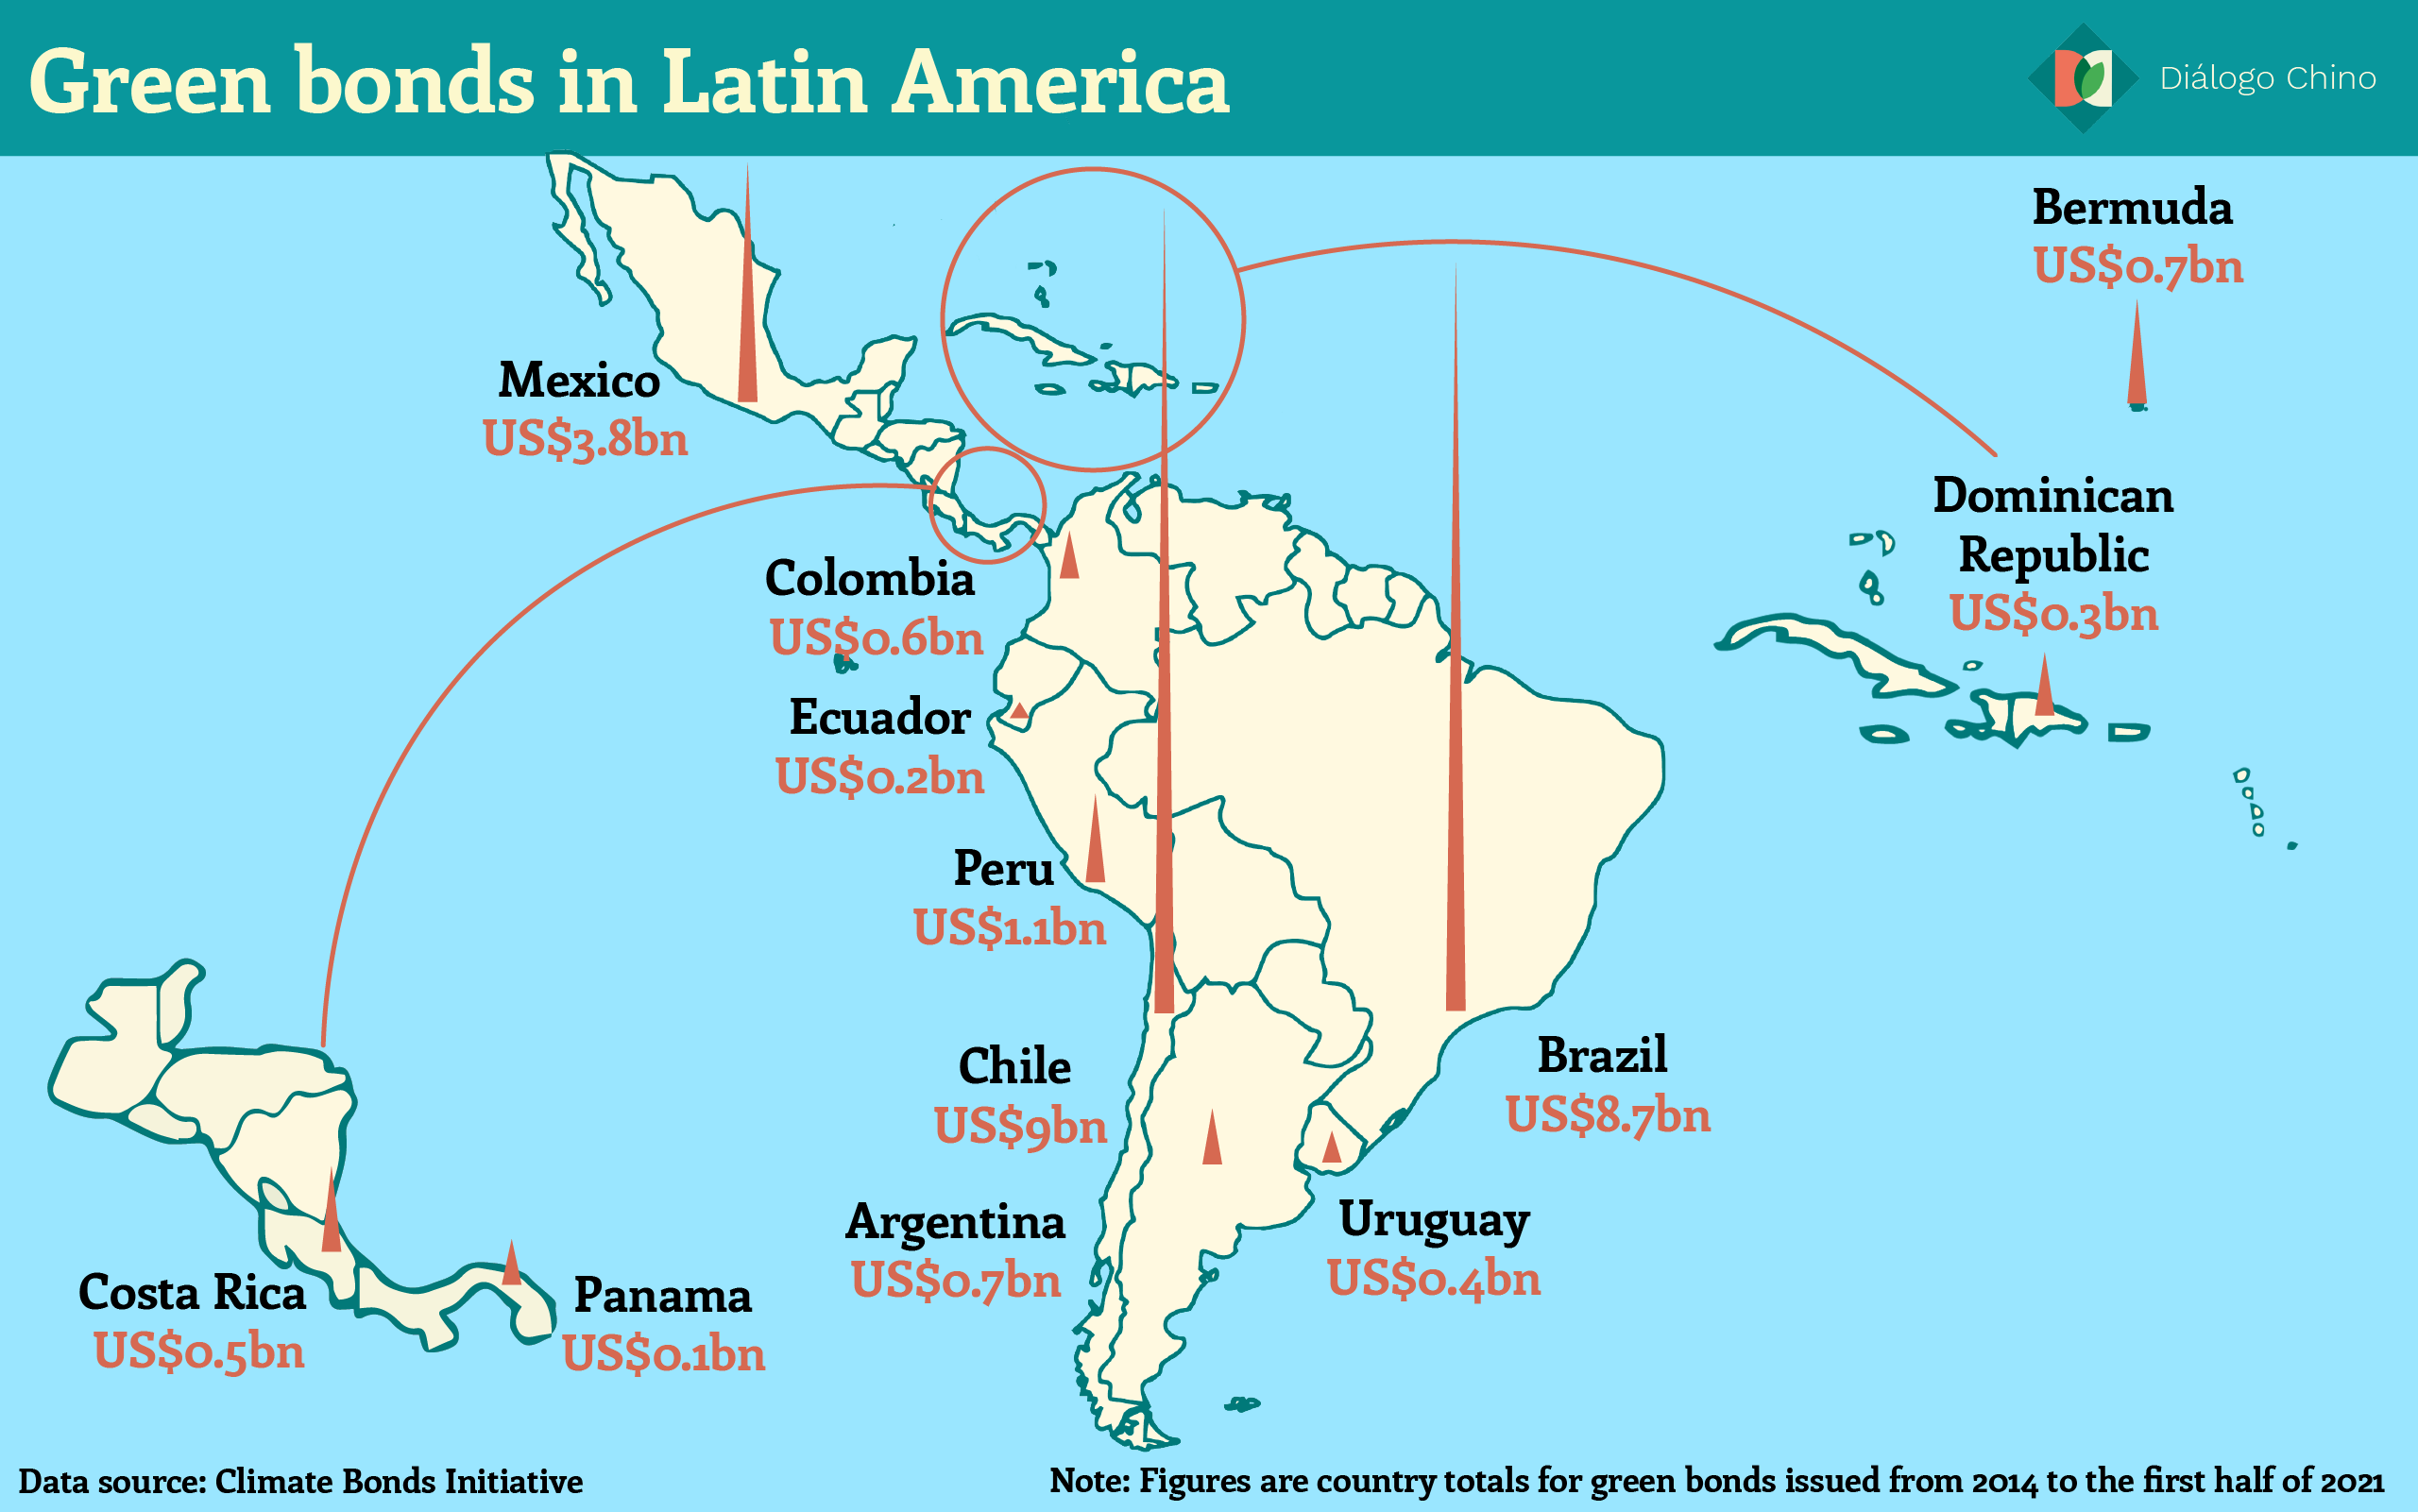 Map of Latin America showing green bonds in the region